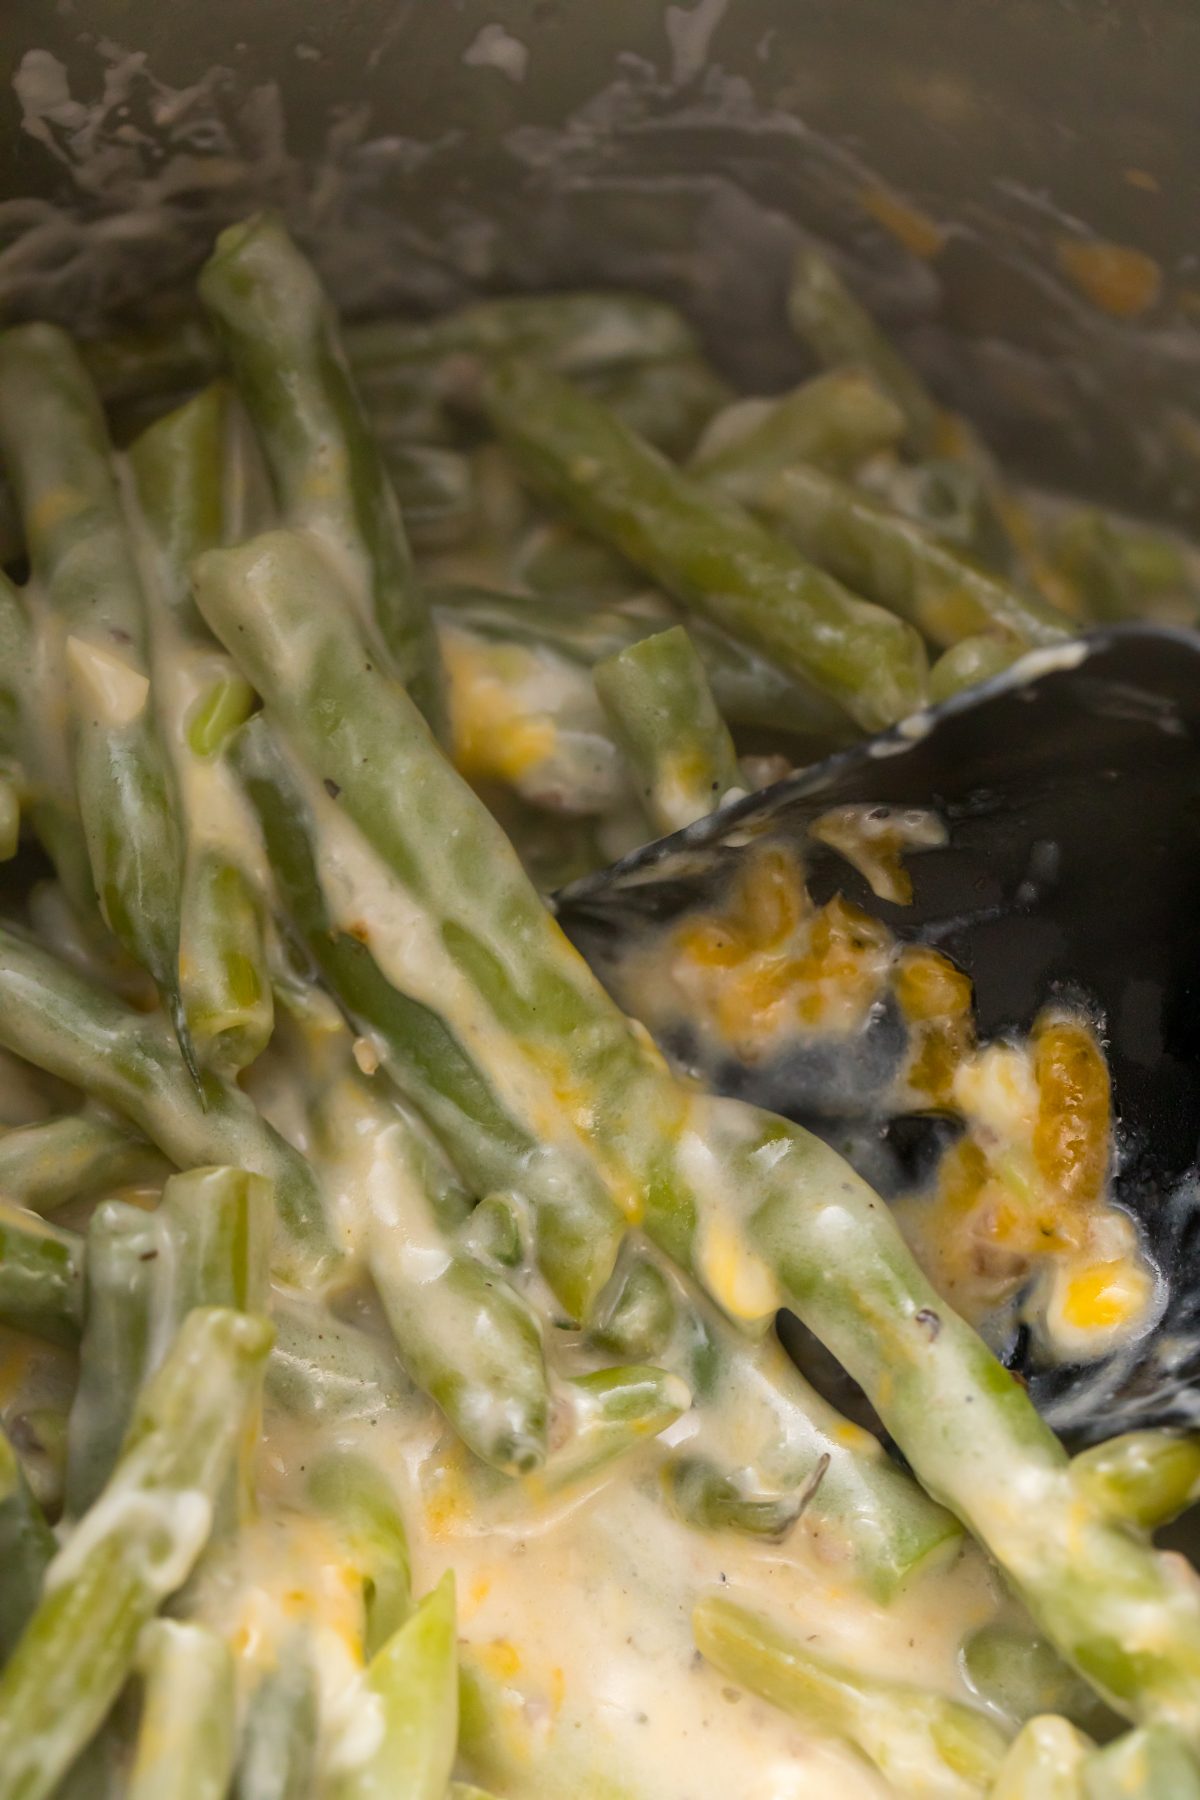 Stir the cheese into the green beans